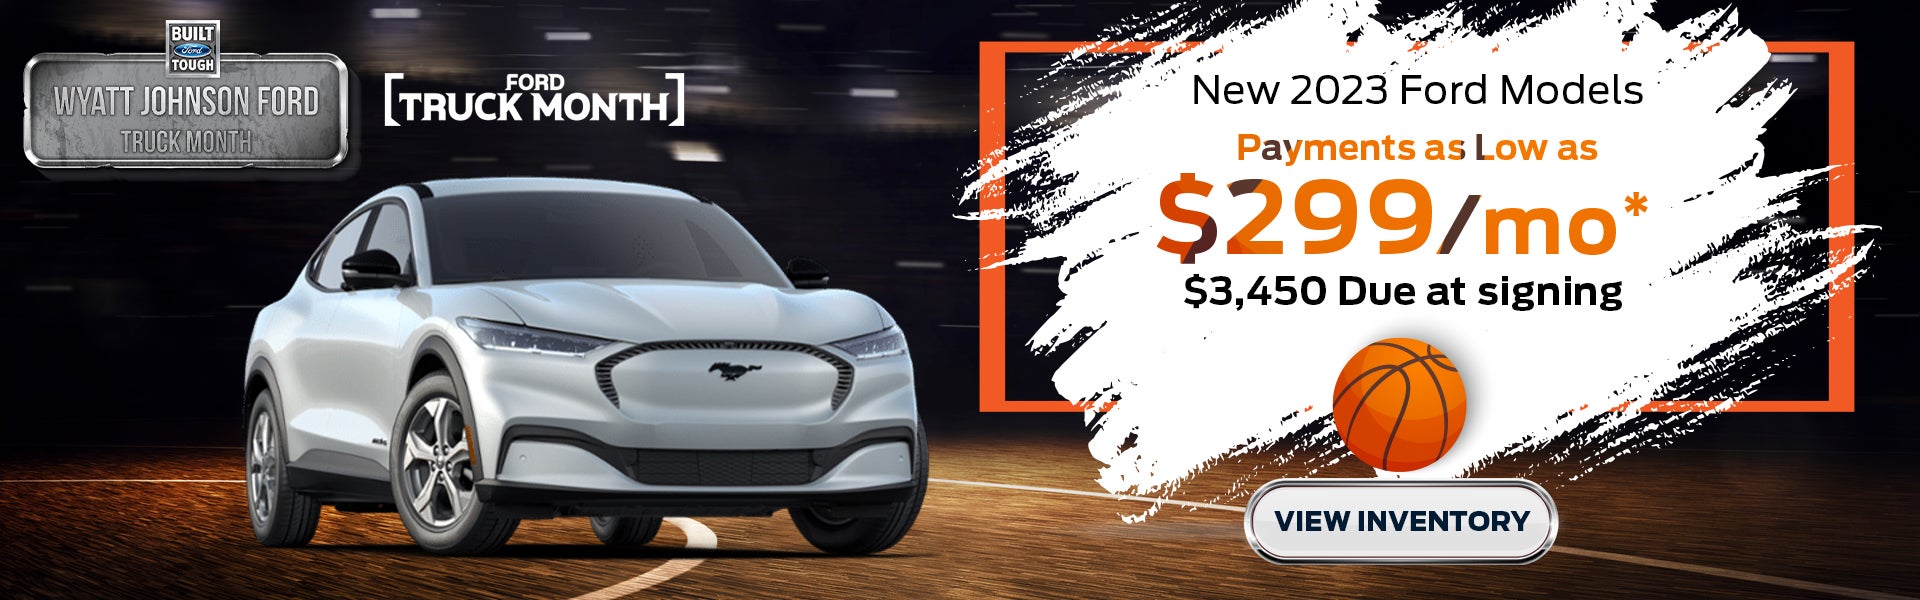 Lease new Ford models for as low as $299 in Nashville, TN